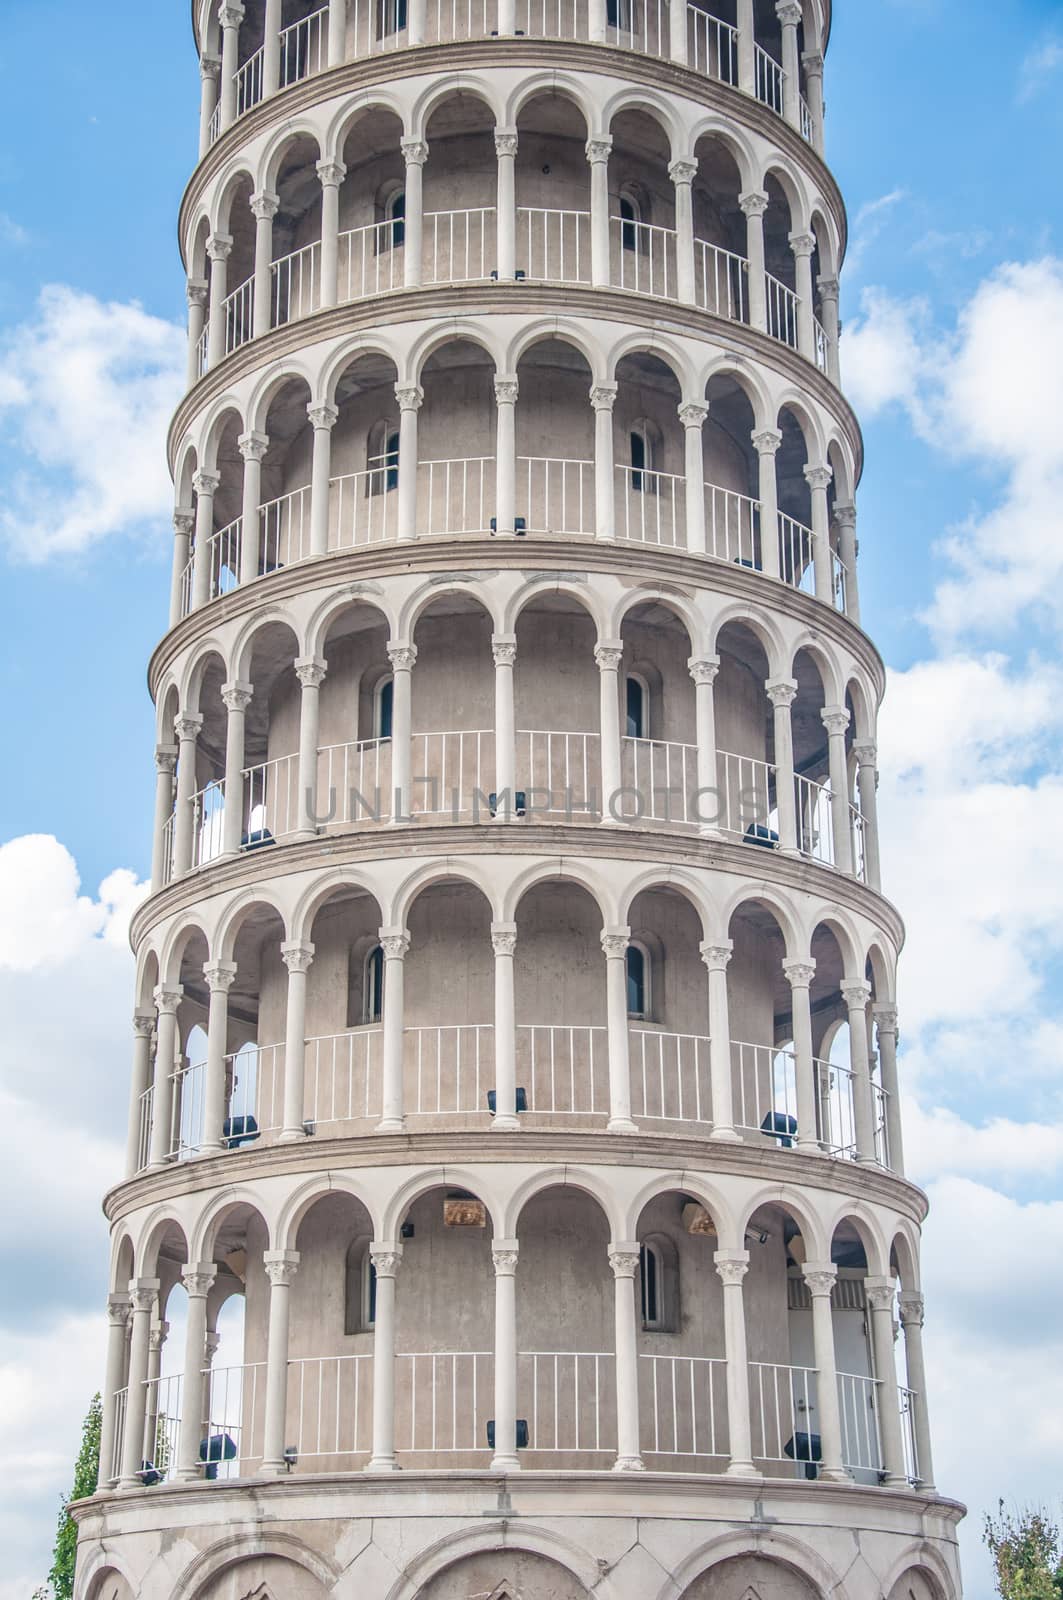 Pisa Tower by CHR1